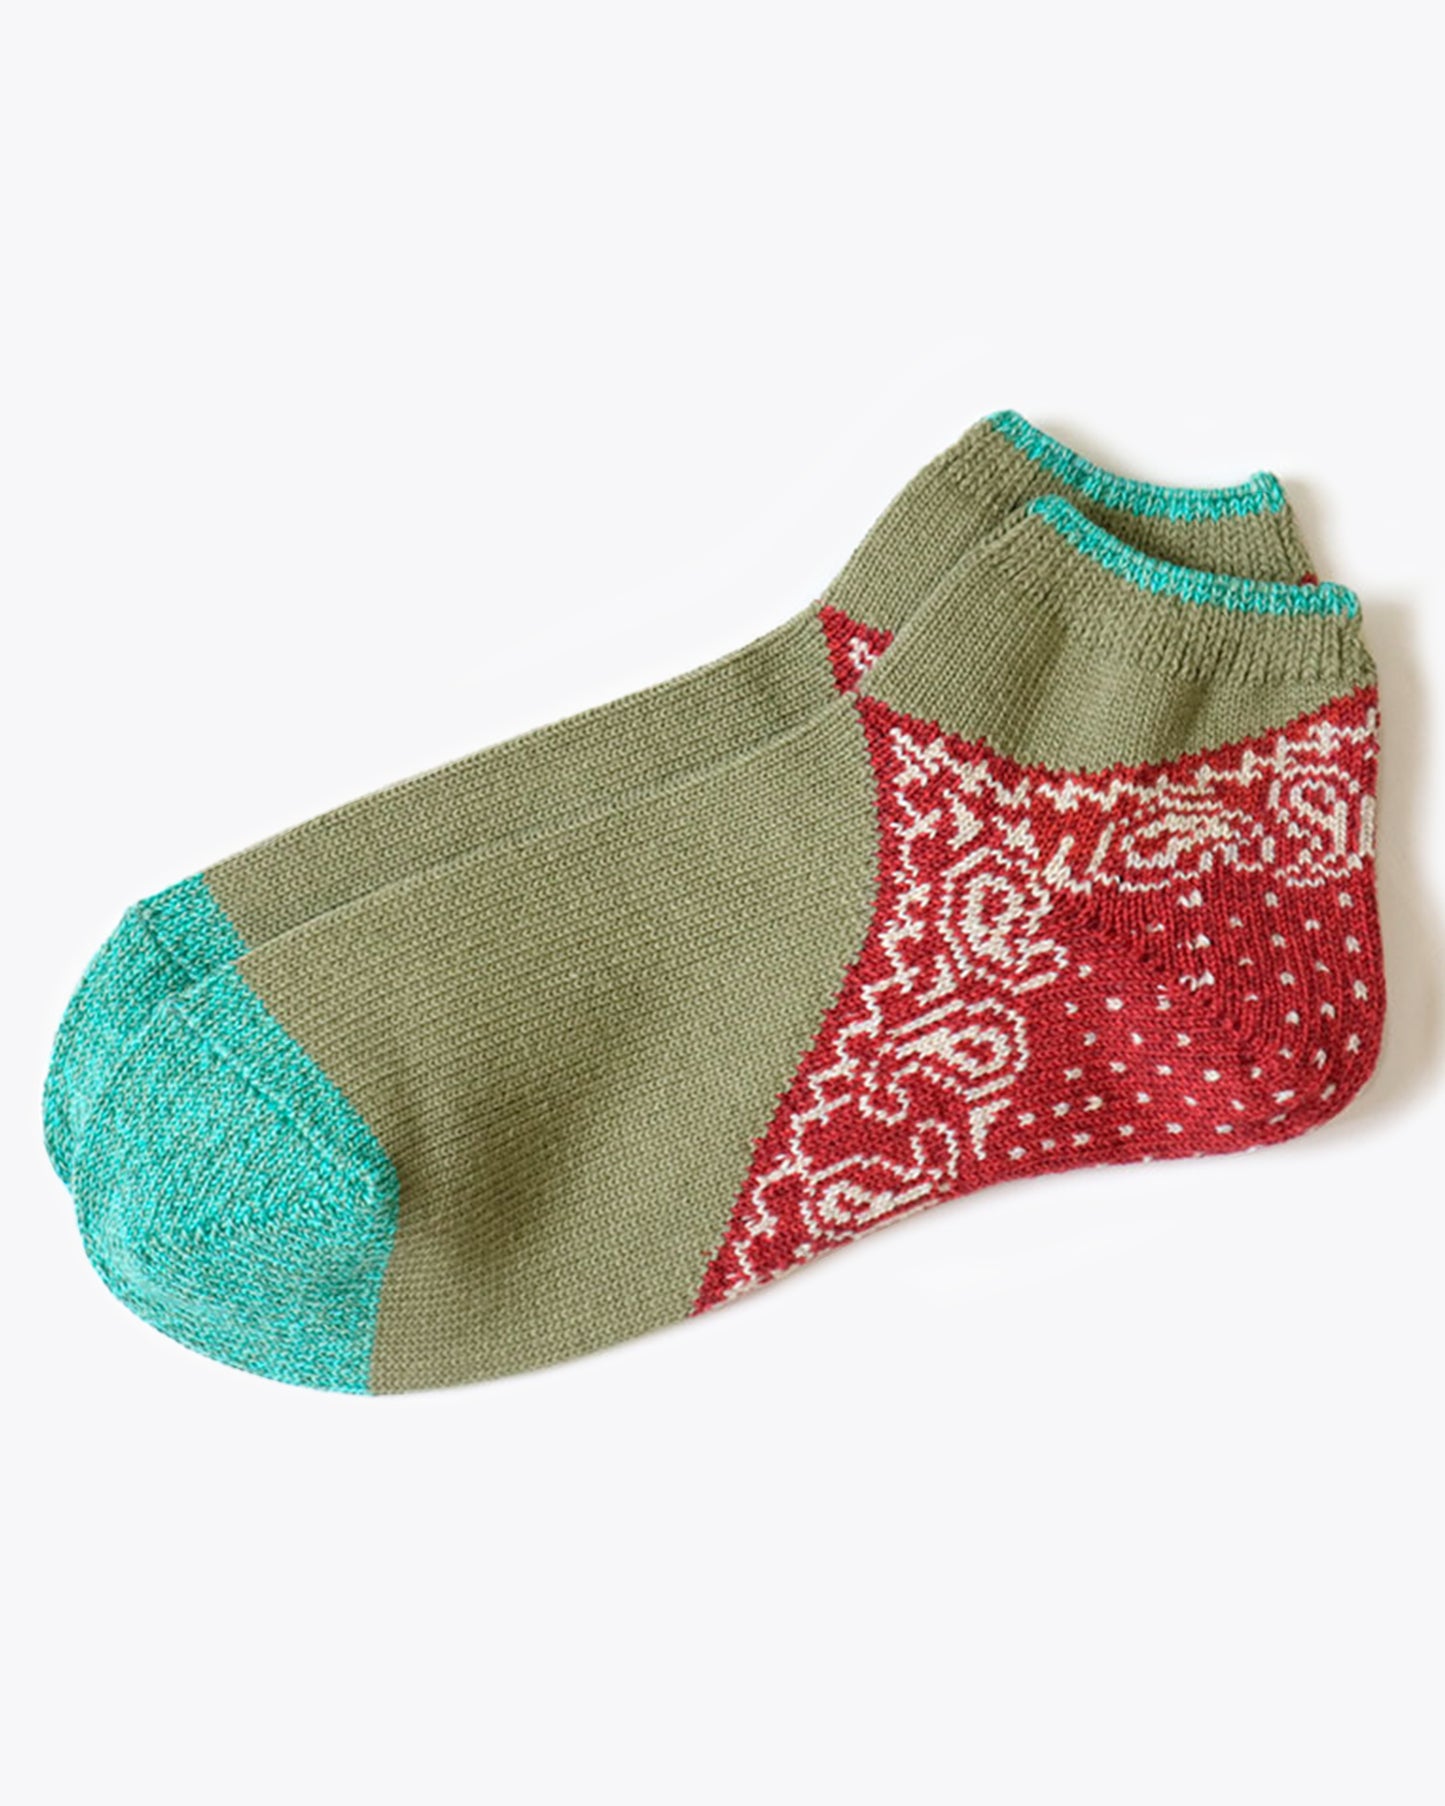 A pair of moderately thick ankle socks with a paisley bandana heel.